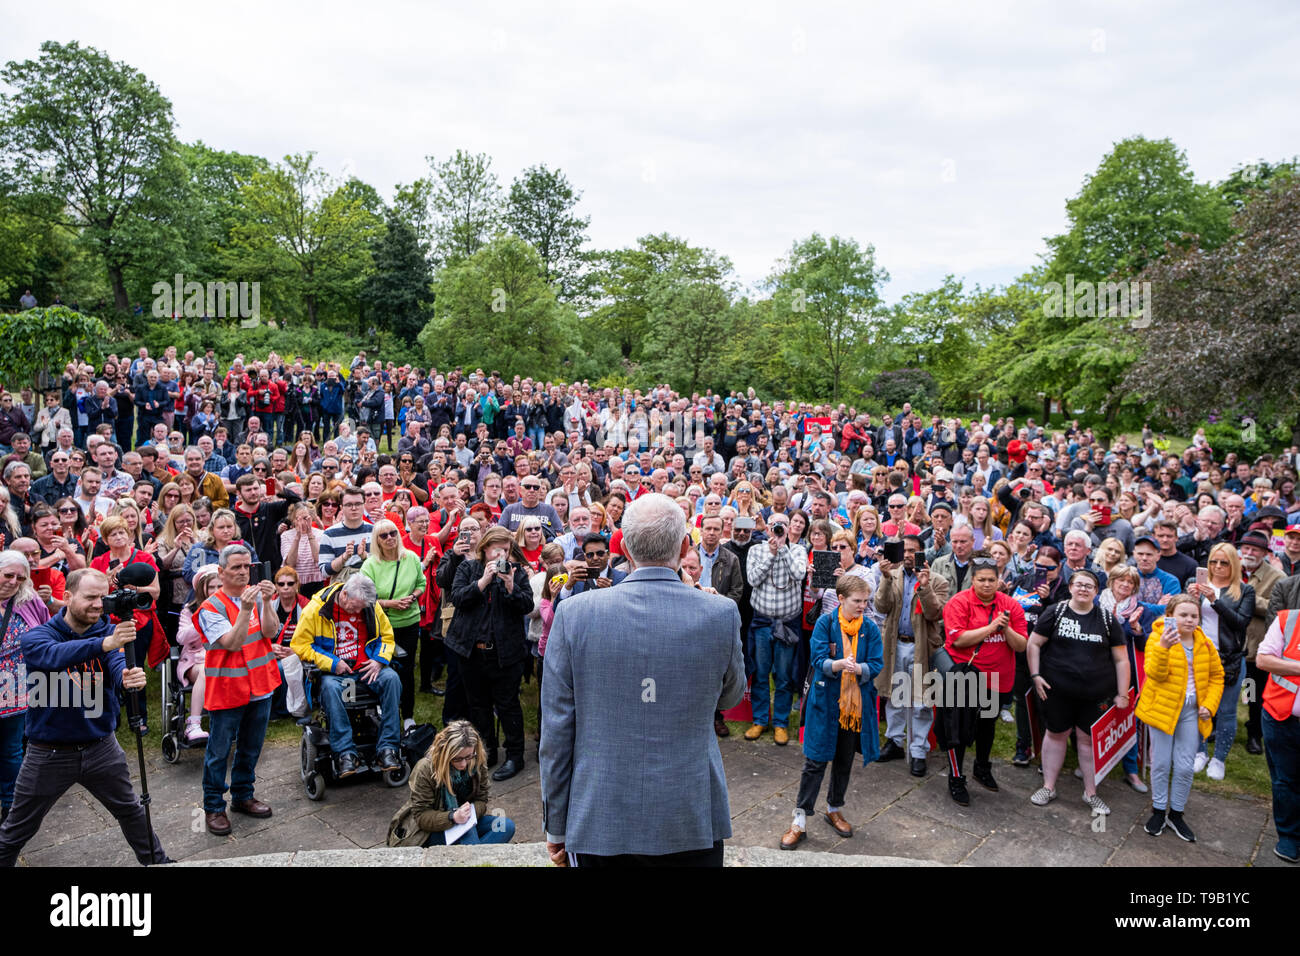 Bootle, UK. May 18, 2019. The leader of the opposition, Jeremy Corbyn MP, visits Bootle, Merseyside in the north west of England, on Saturday, May 18, 2019, as part of a campaign trail ahead of the upcoming European Parliament elections. Credit: Christopher Middleton/Alamy Live News Stock Photo